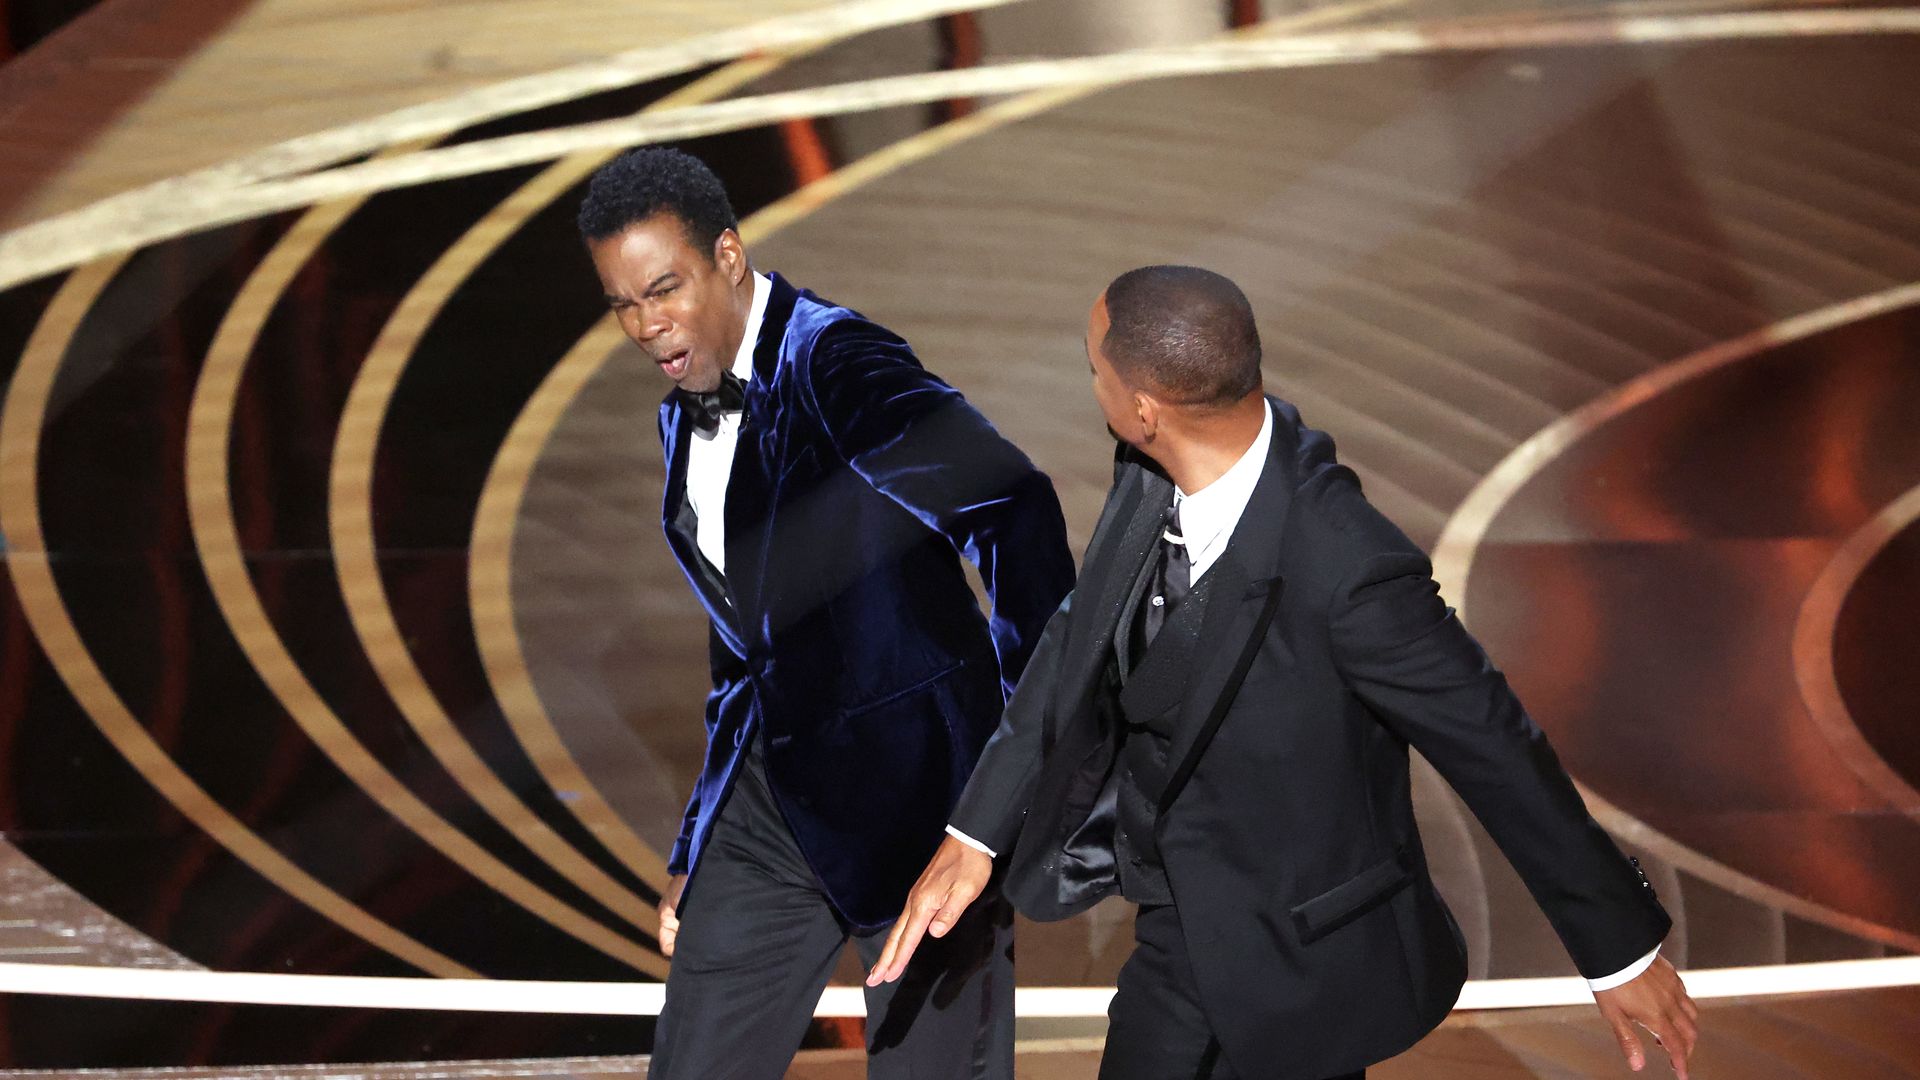 Will Smith slaps Chris Rock onstage during the show at the 94th Academy Awards at the Dolby Theatre at Ovation Hollywood on Sunday, March 27